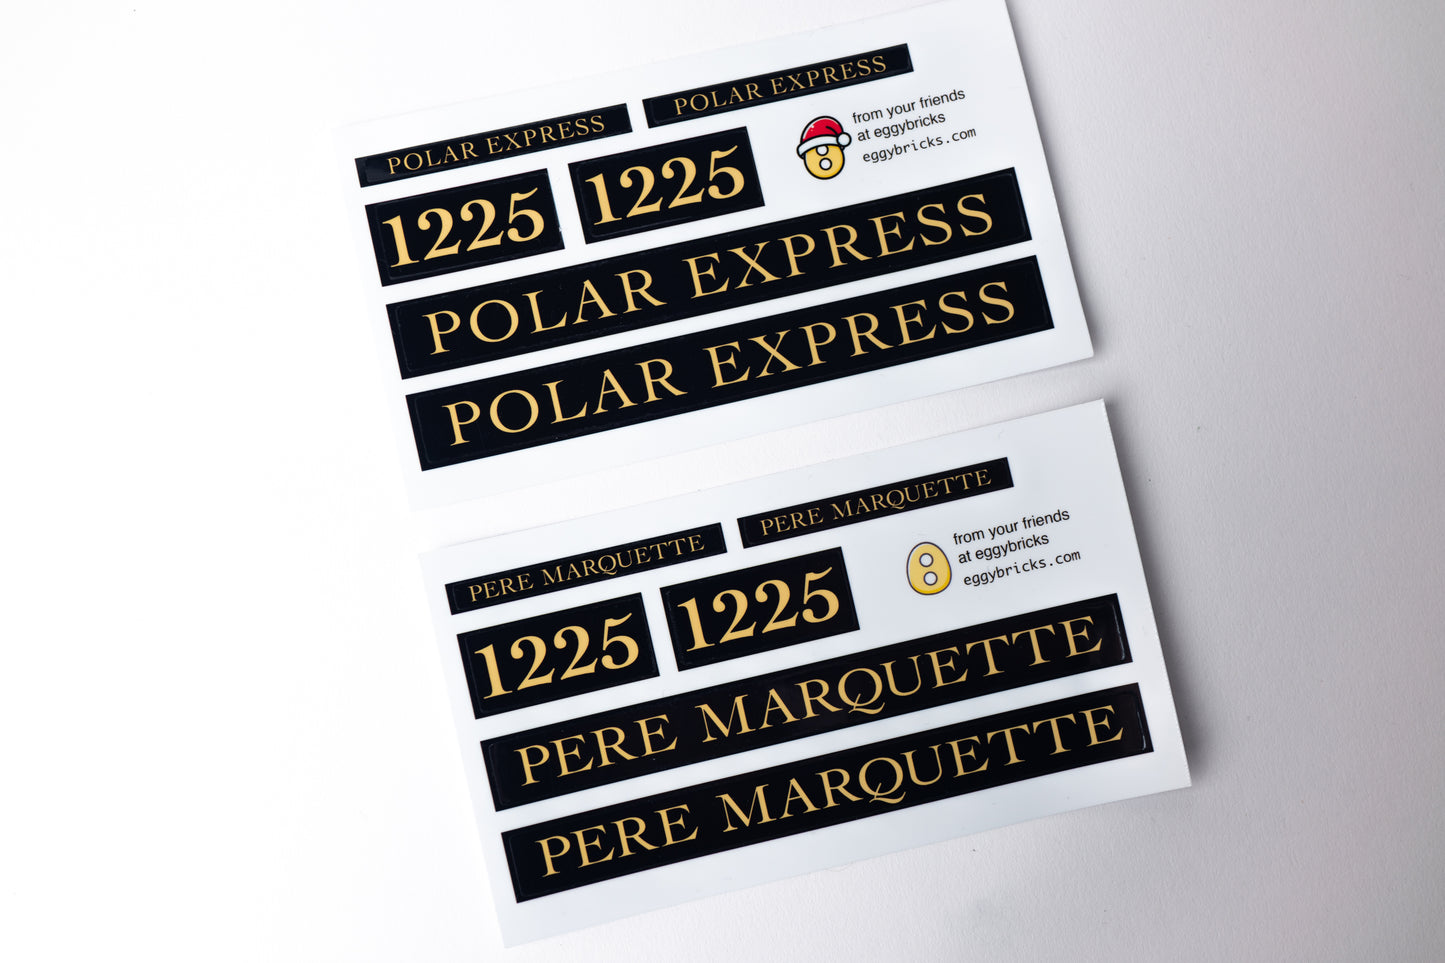 Polar Express (Pere Marquette 1225) Steam Locomotive, Instructions + Stickers ONLY